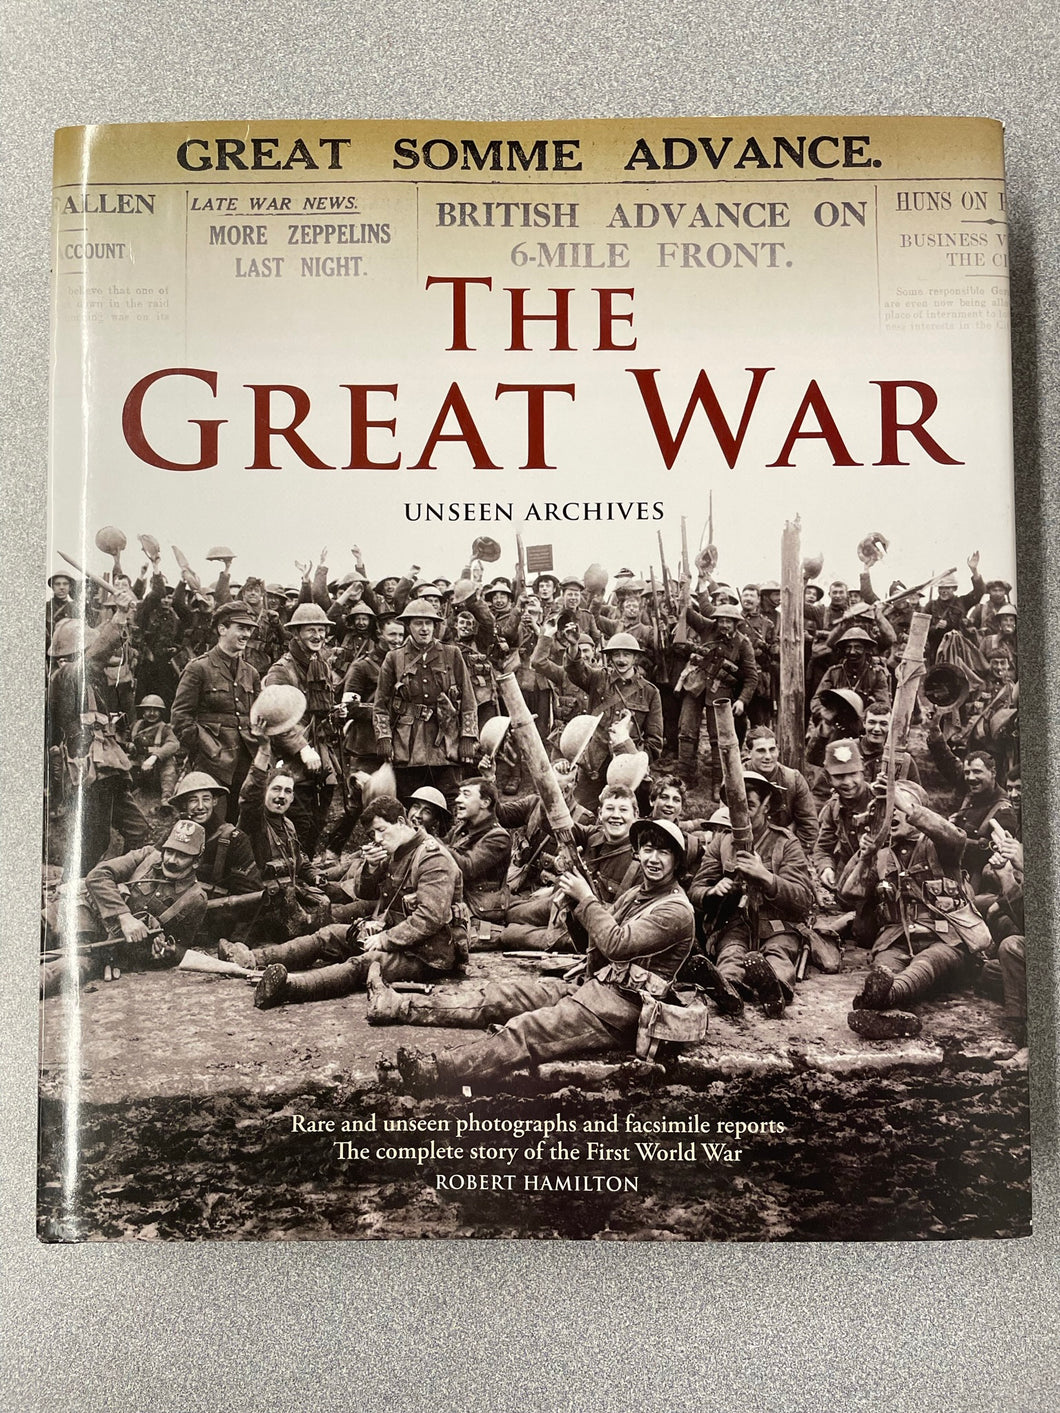 The Great War: Unseen Archives: Rare and Unseen Photographs and Facsimile Reports, Hamilton, Robert [2014] ML 9/23